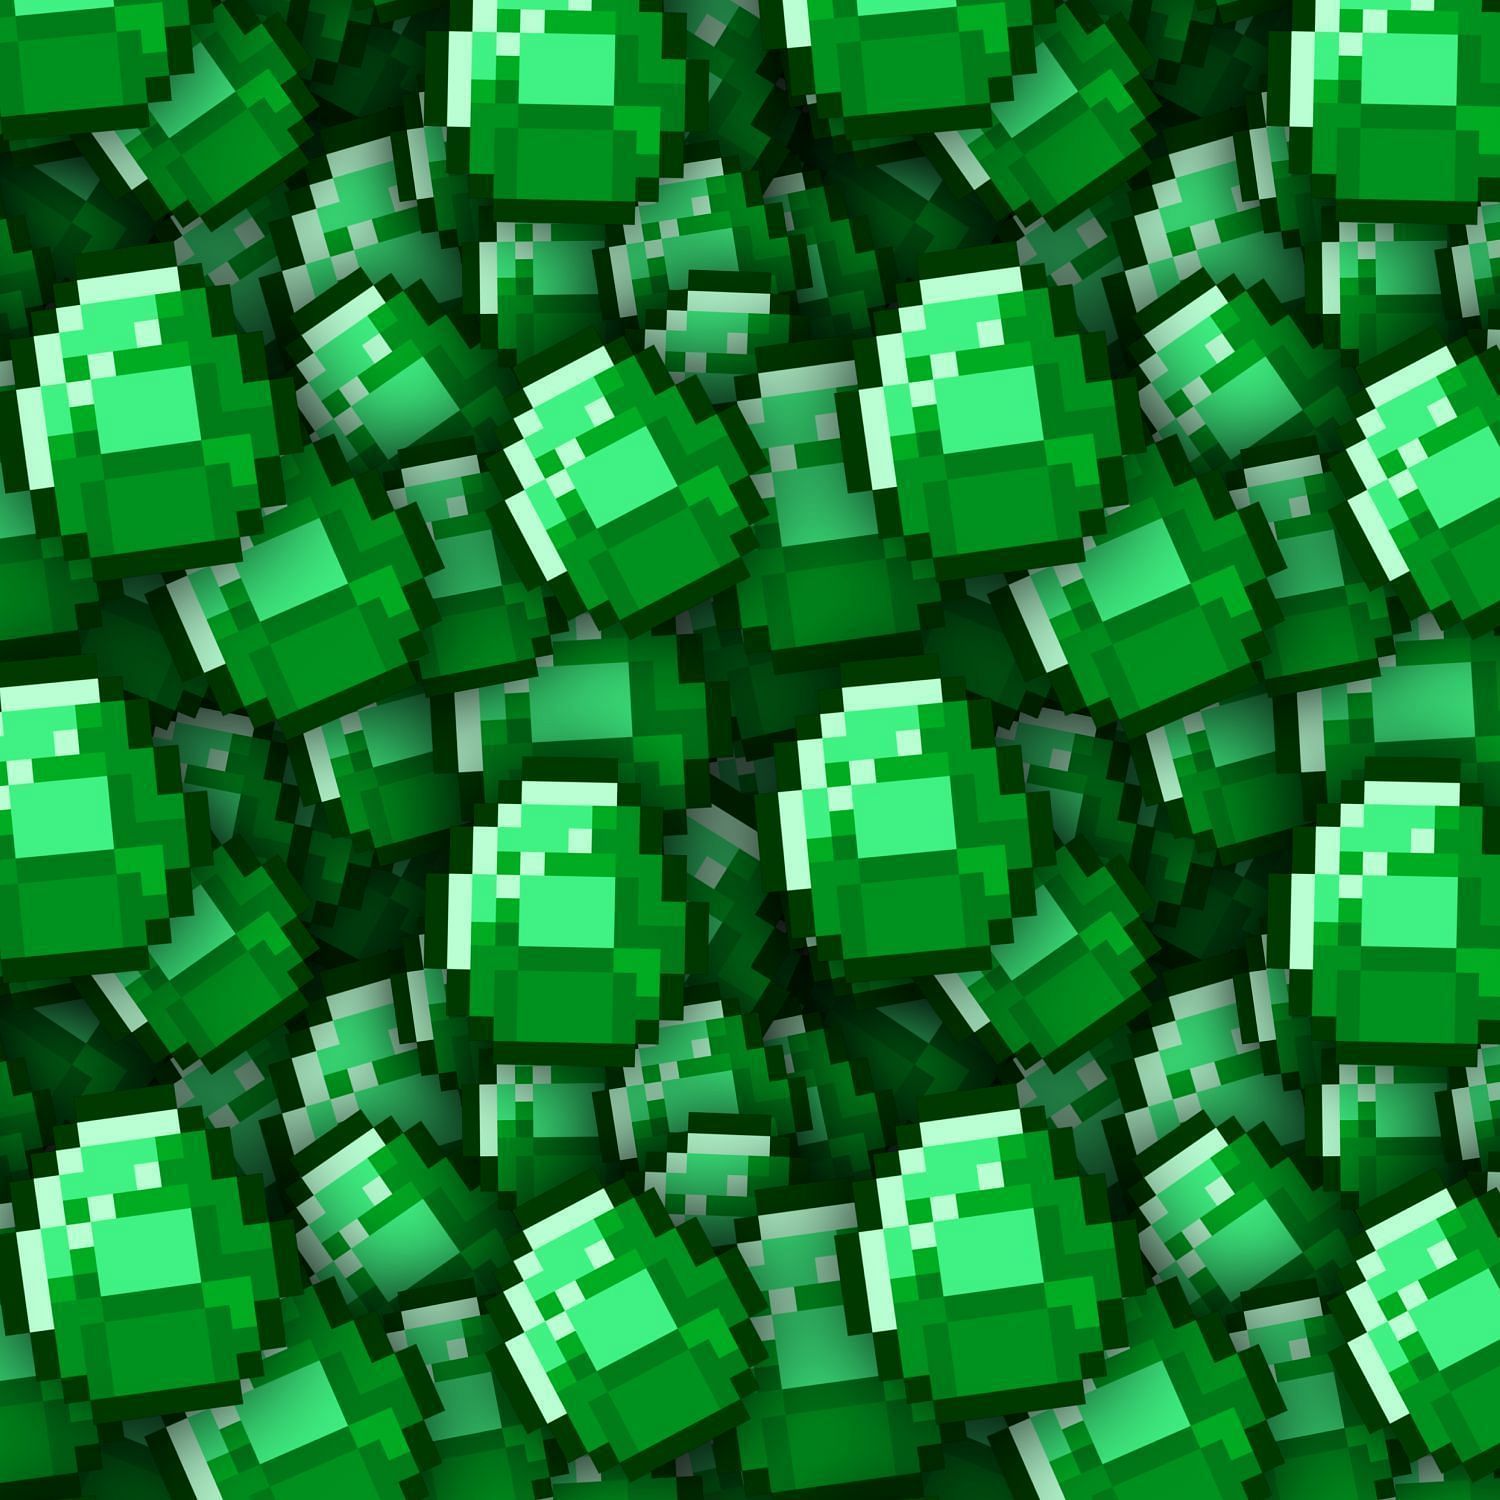 Emeralds are the currency of Minecraft (Image via WallpaperAccess/Minecraft)